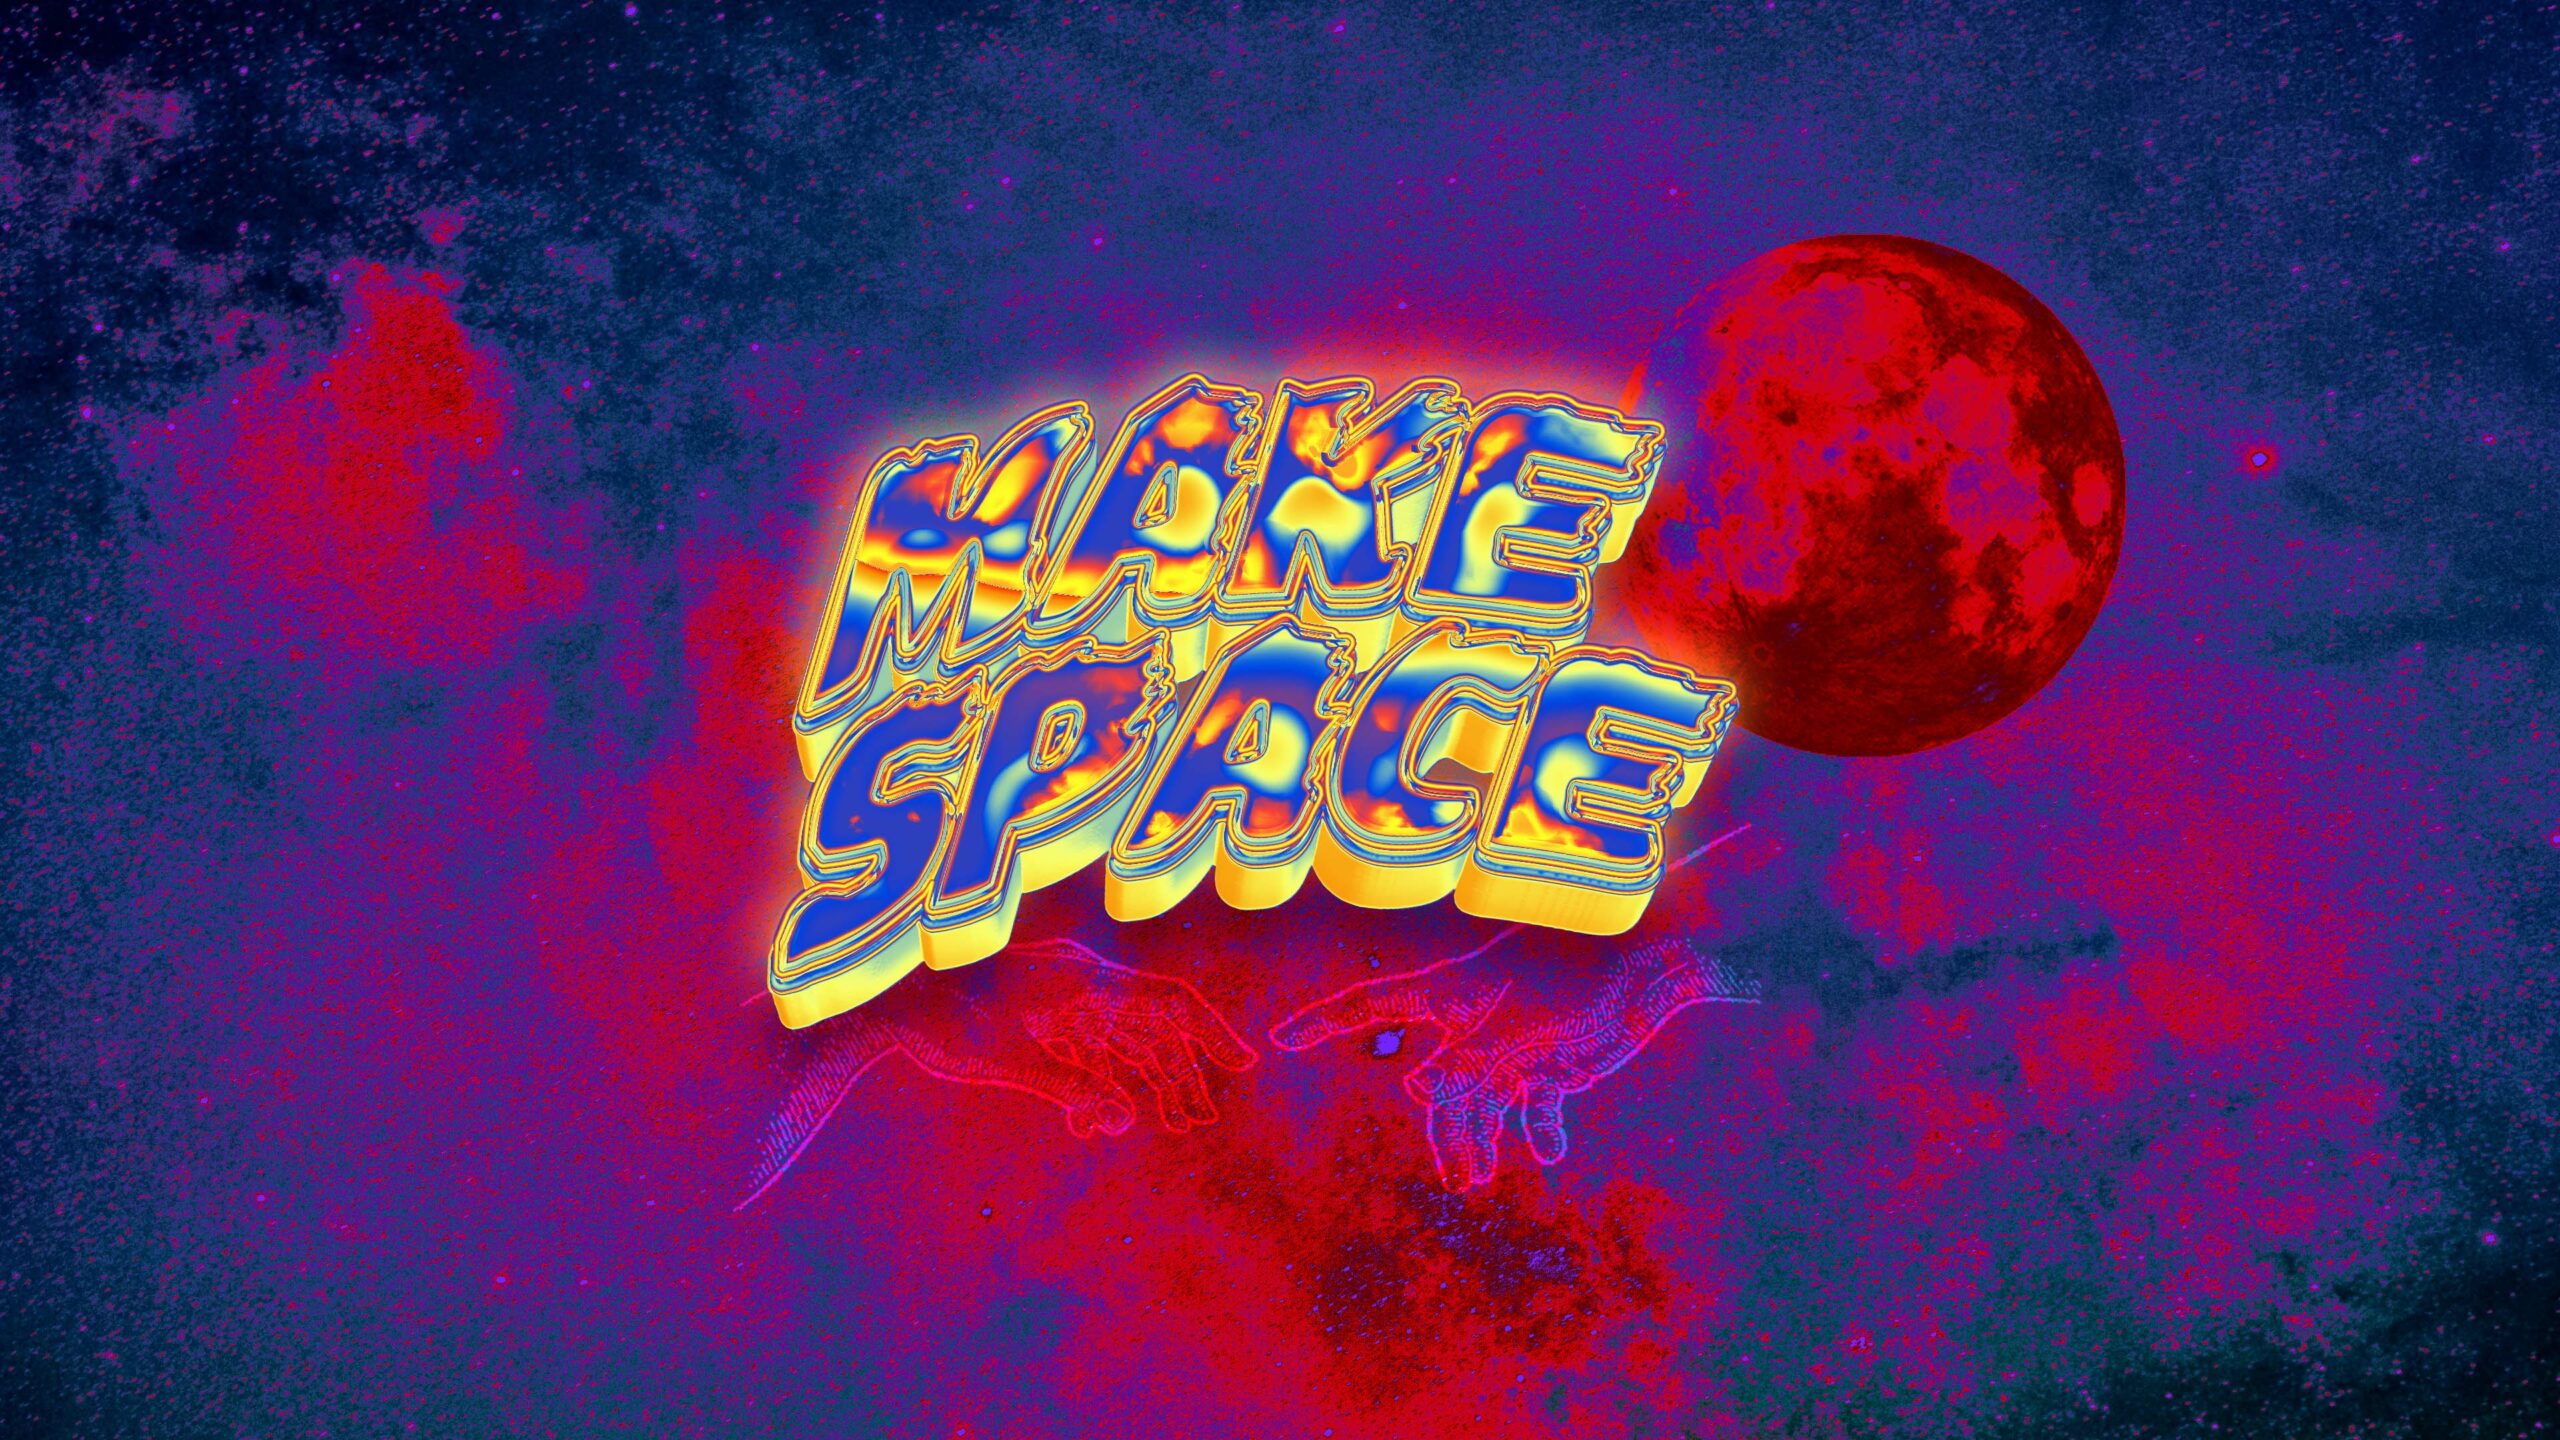 Make Space youth graphic